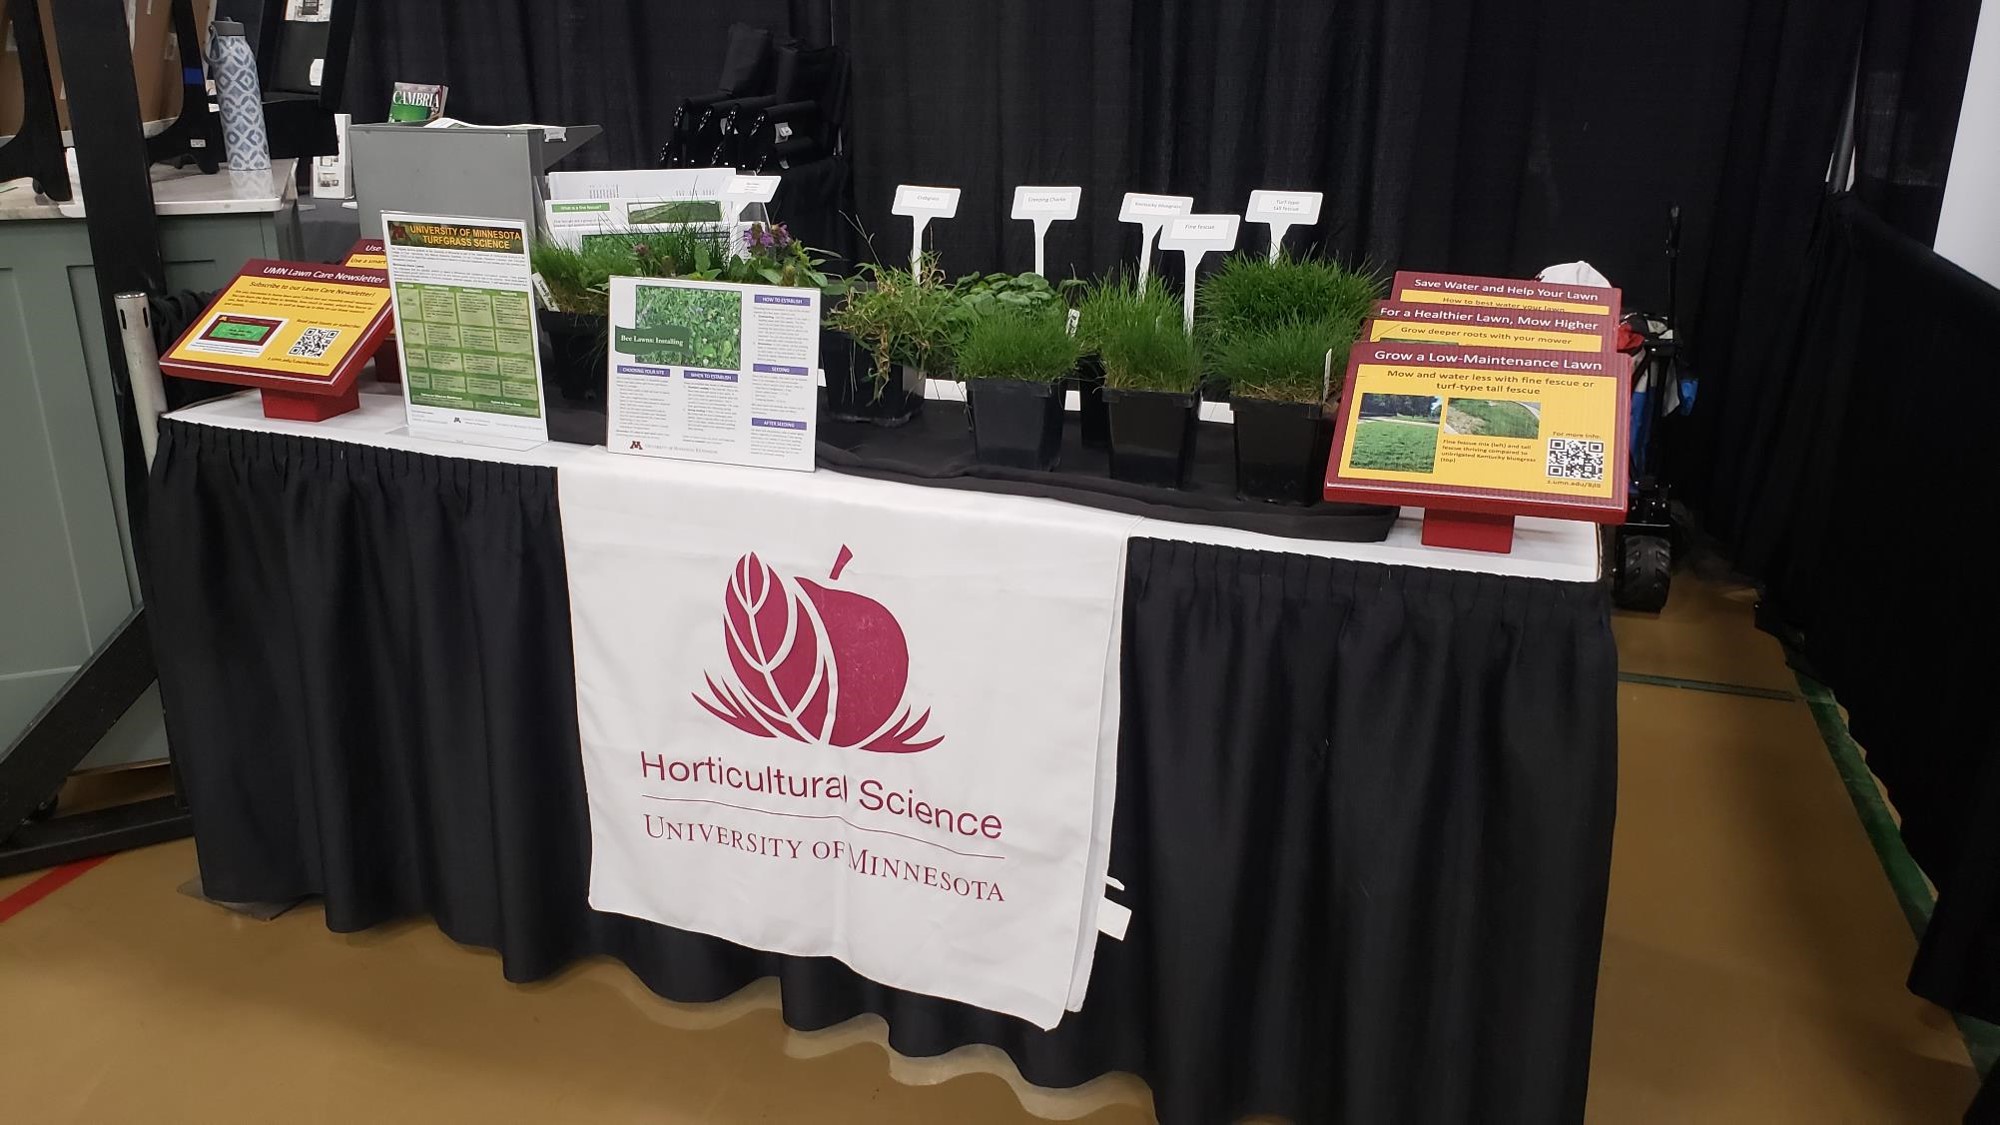 a turfgrass educational display with live plants, signs and handouts